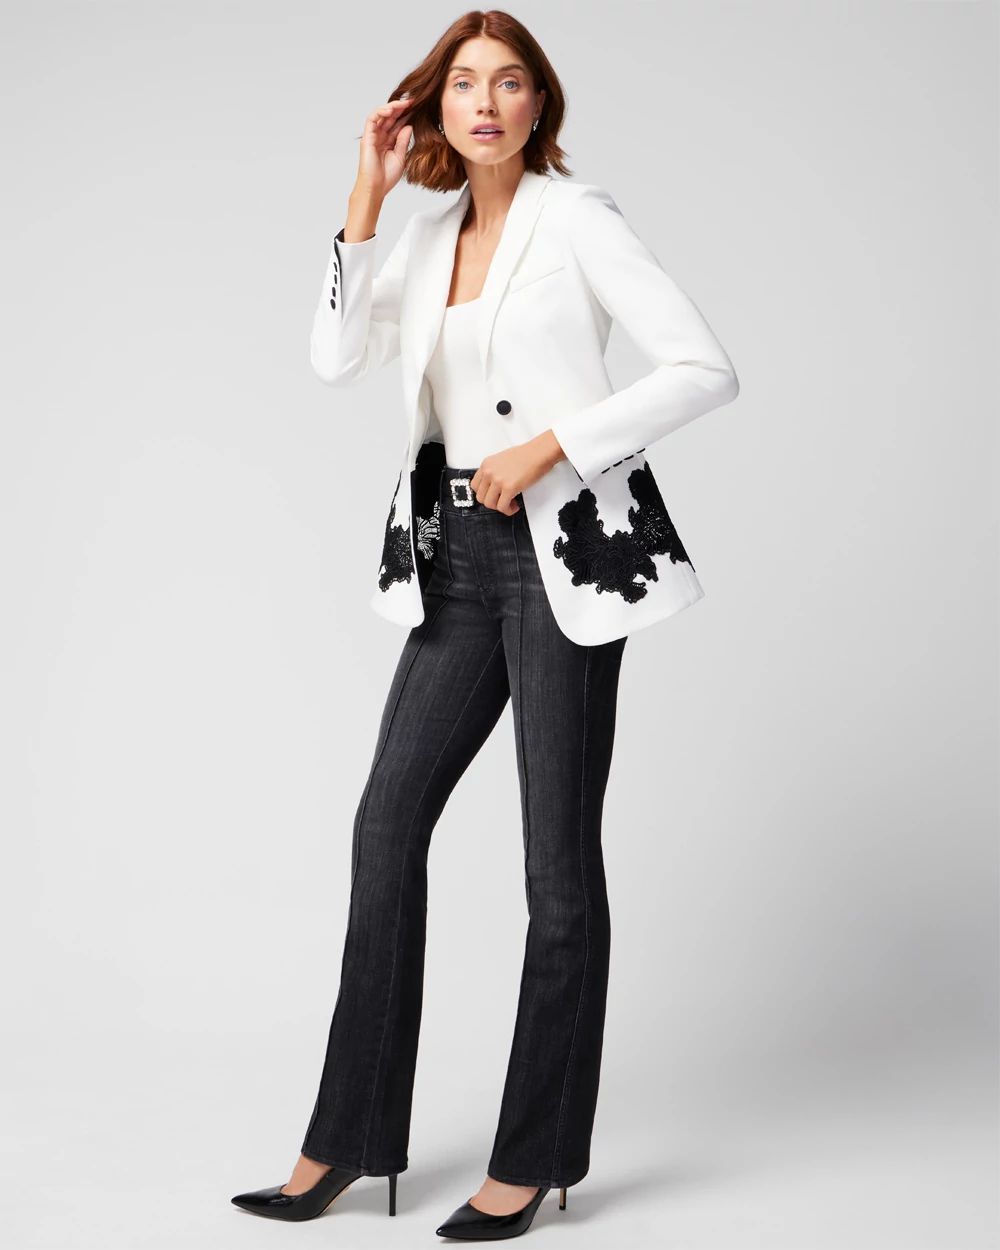 Petite Fashion Blazer With Lace click to view larger image.